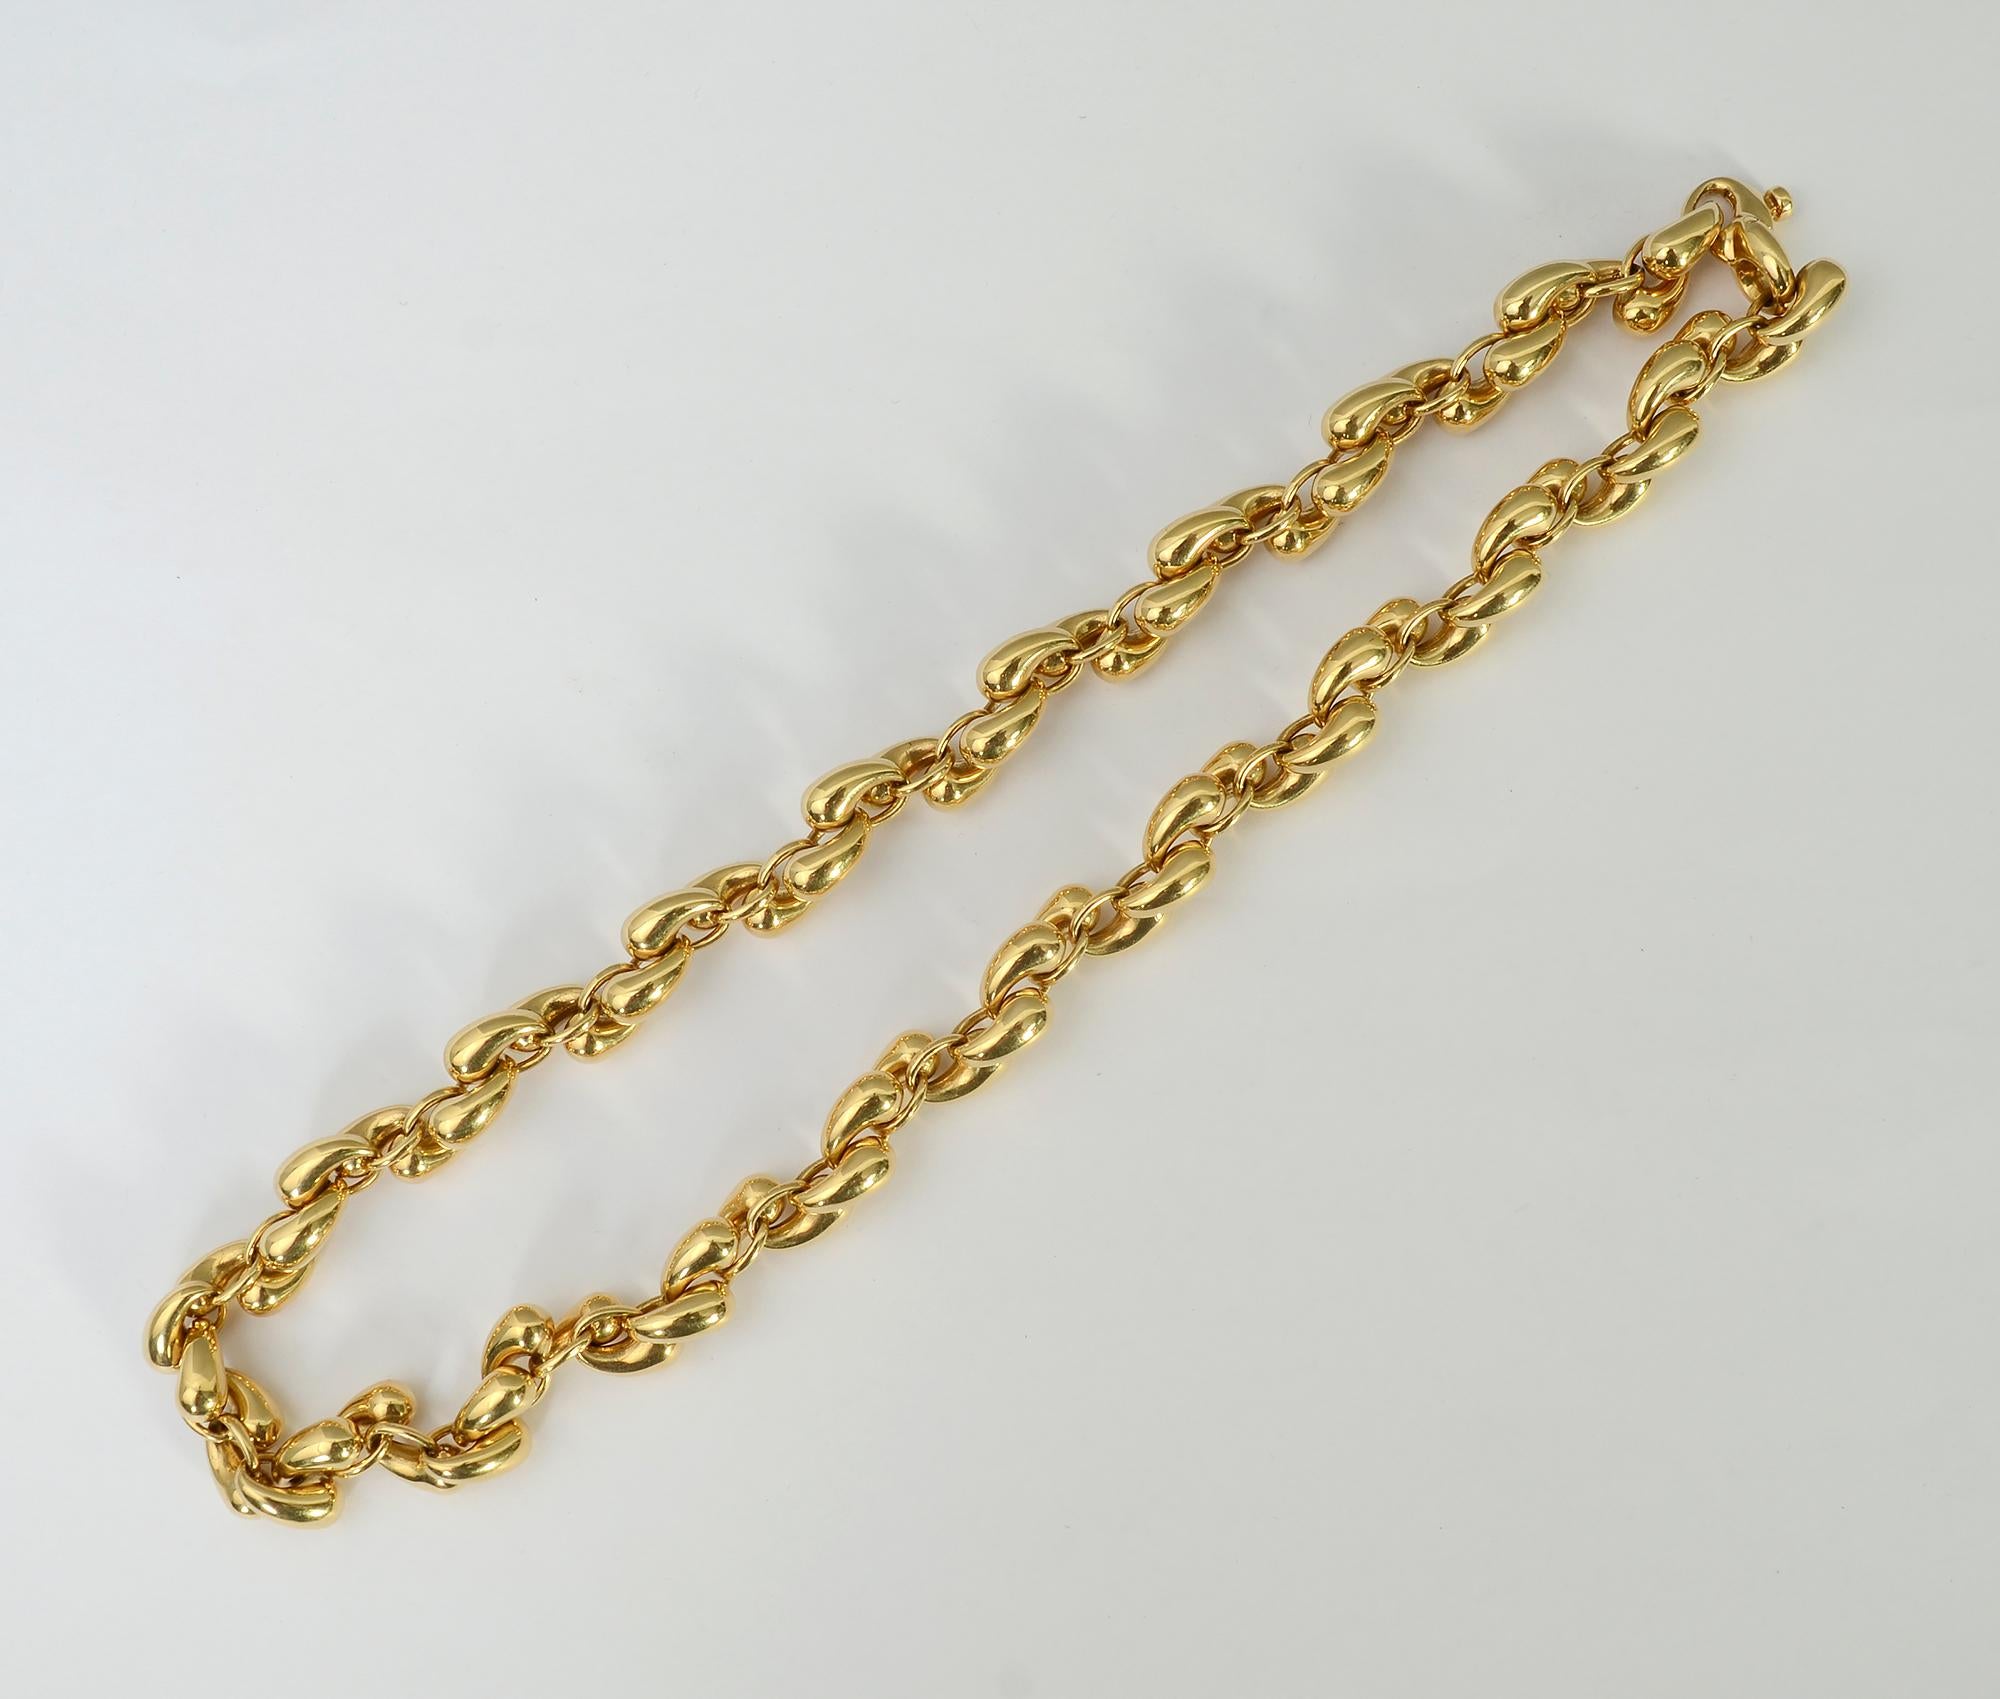 Gubelin 18 karat gold necklace with most unusual links. Each goes from narrow to a curved bulbous shape. Were it not for the sapphire , the clasp would be virtually invisible. The necklace is 18 inches long; links are 1/4 inch wide.